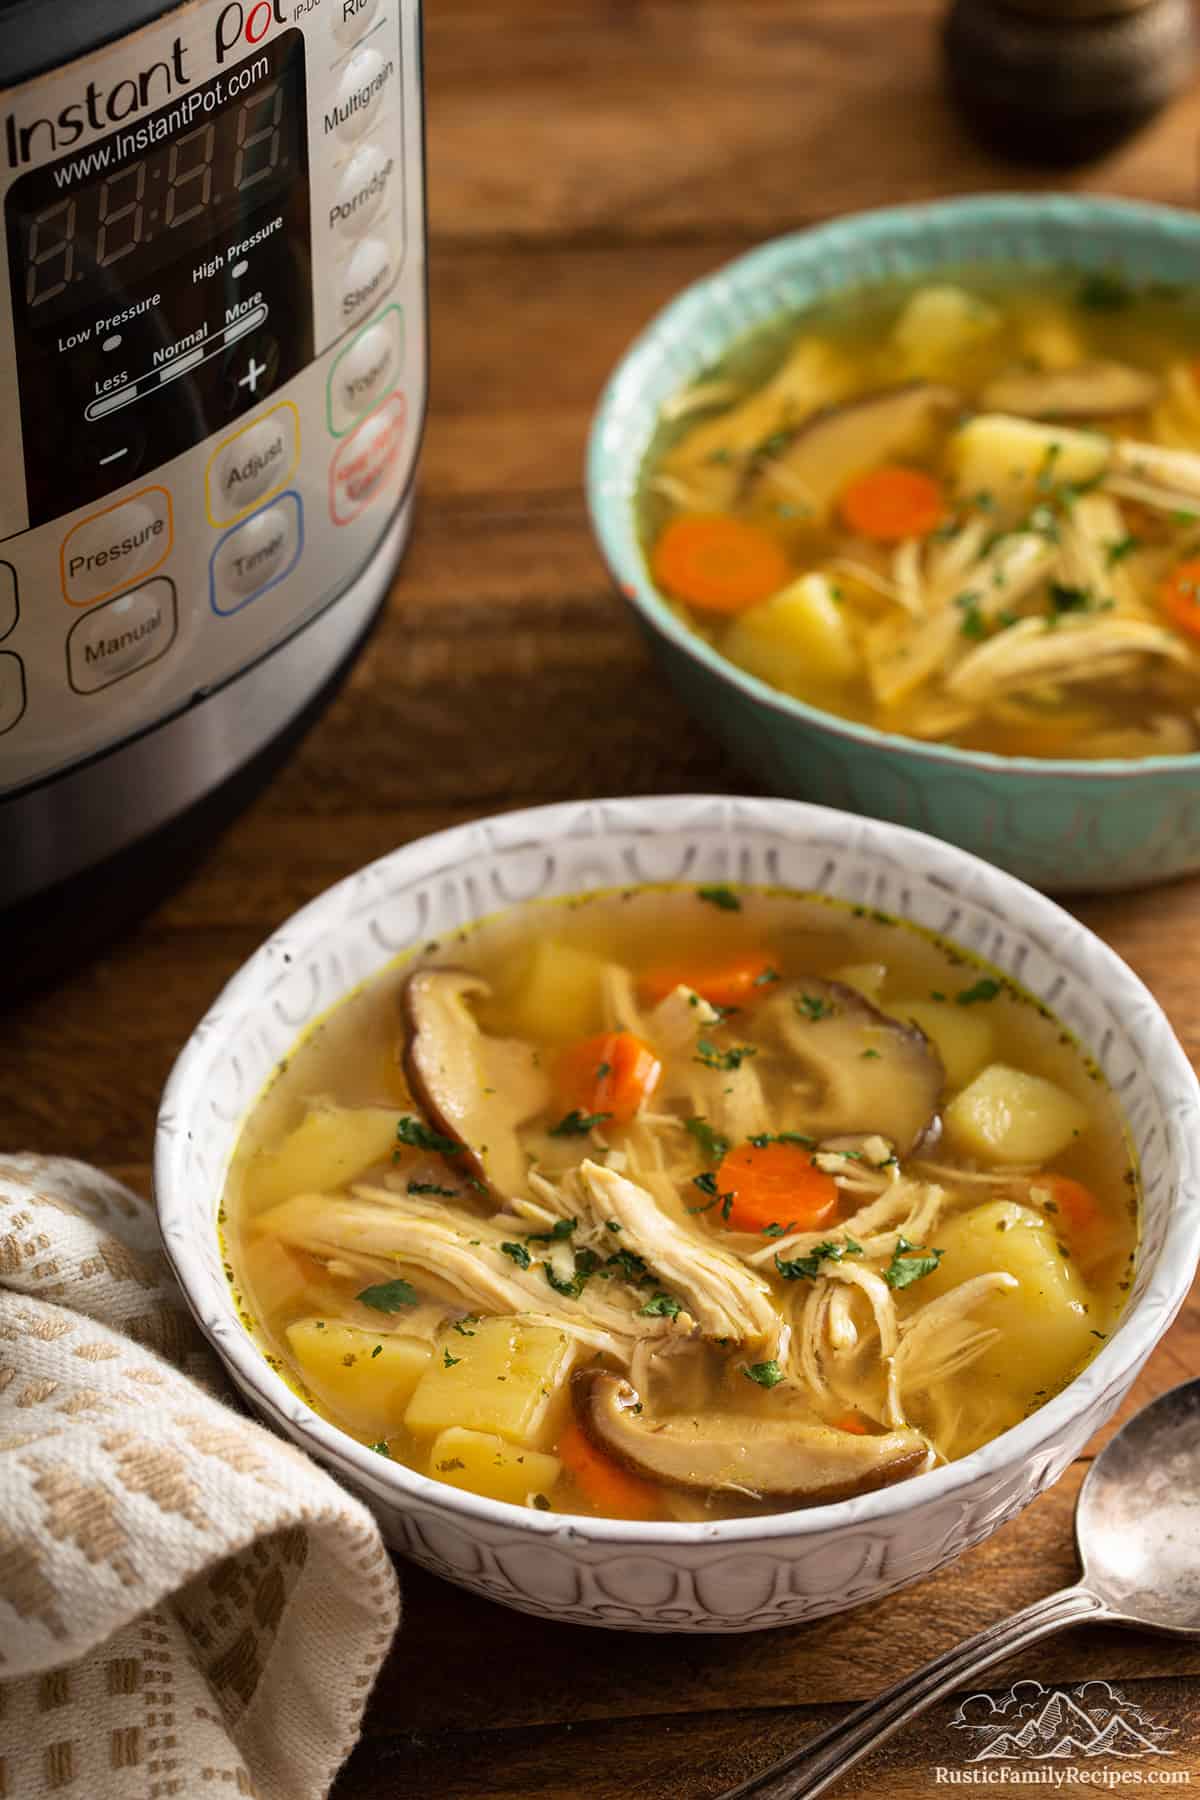 Two bowls of chicken soup in front of an Instant Pot